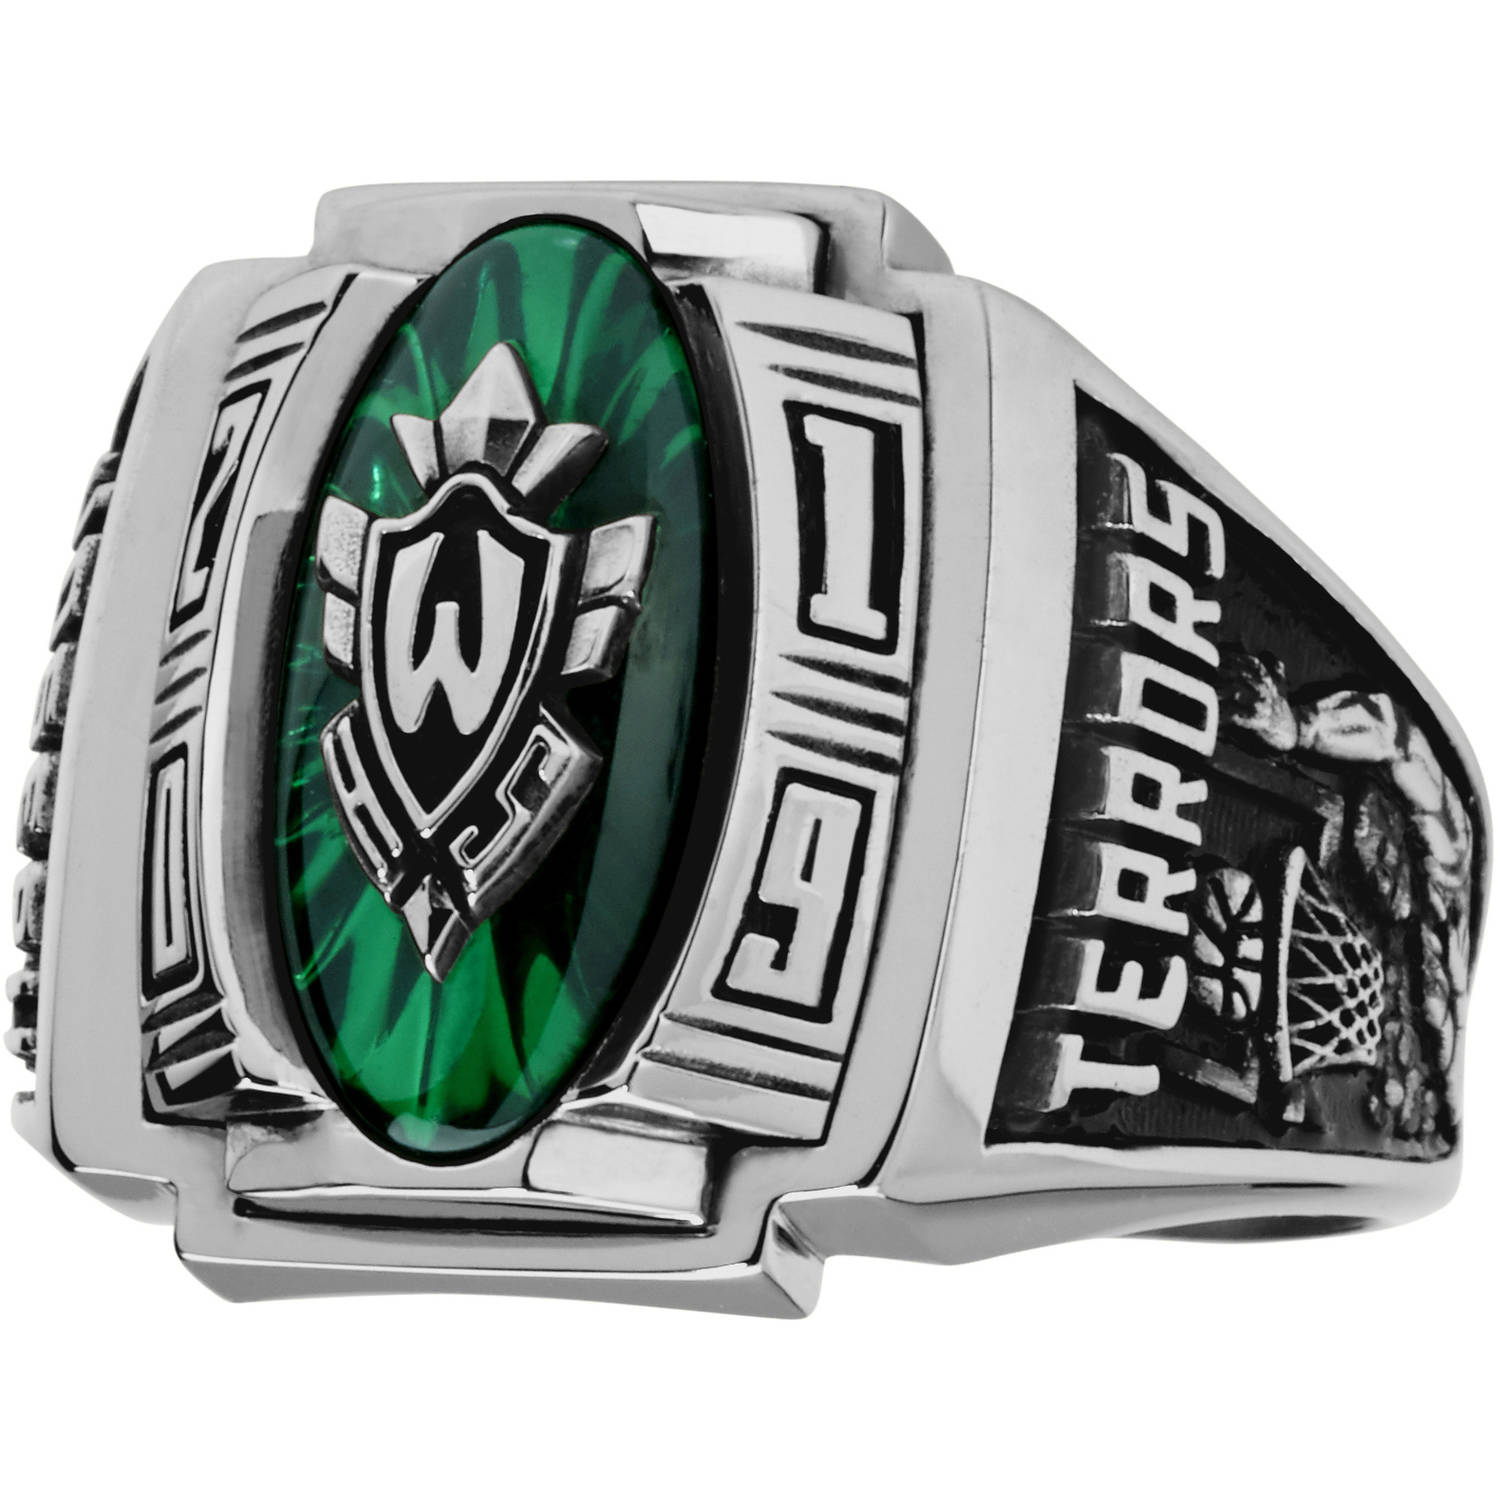 Personalized Men's Varsity Class Ring available in Valadium Metals, Valadium Two-Toned, Silver Plus, 10kt Gold Two-Toned, 10kt Gold - image 1 of 8